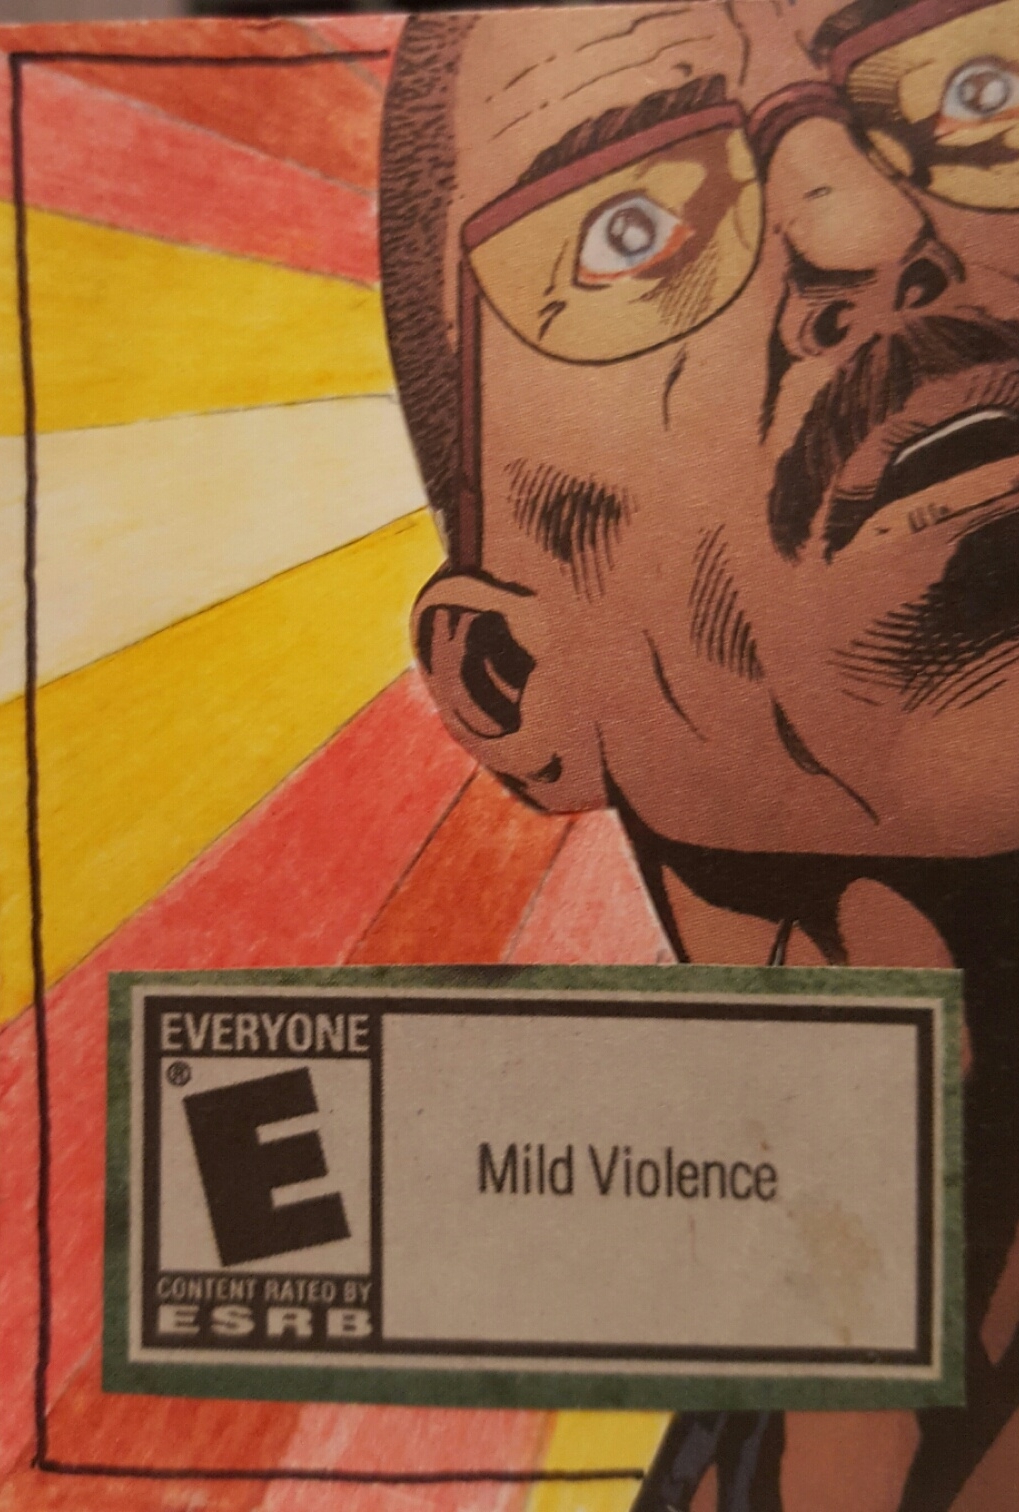 Mild Violence for Everyone